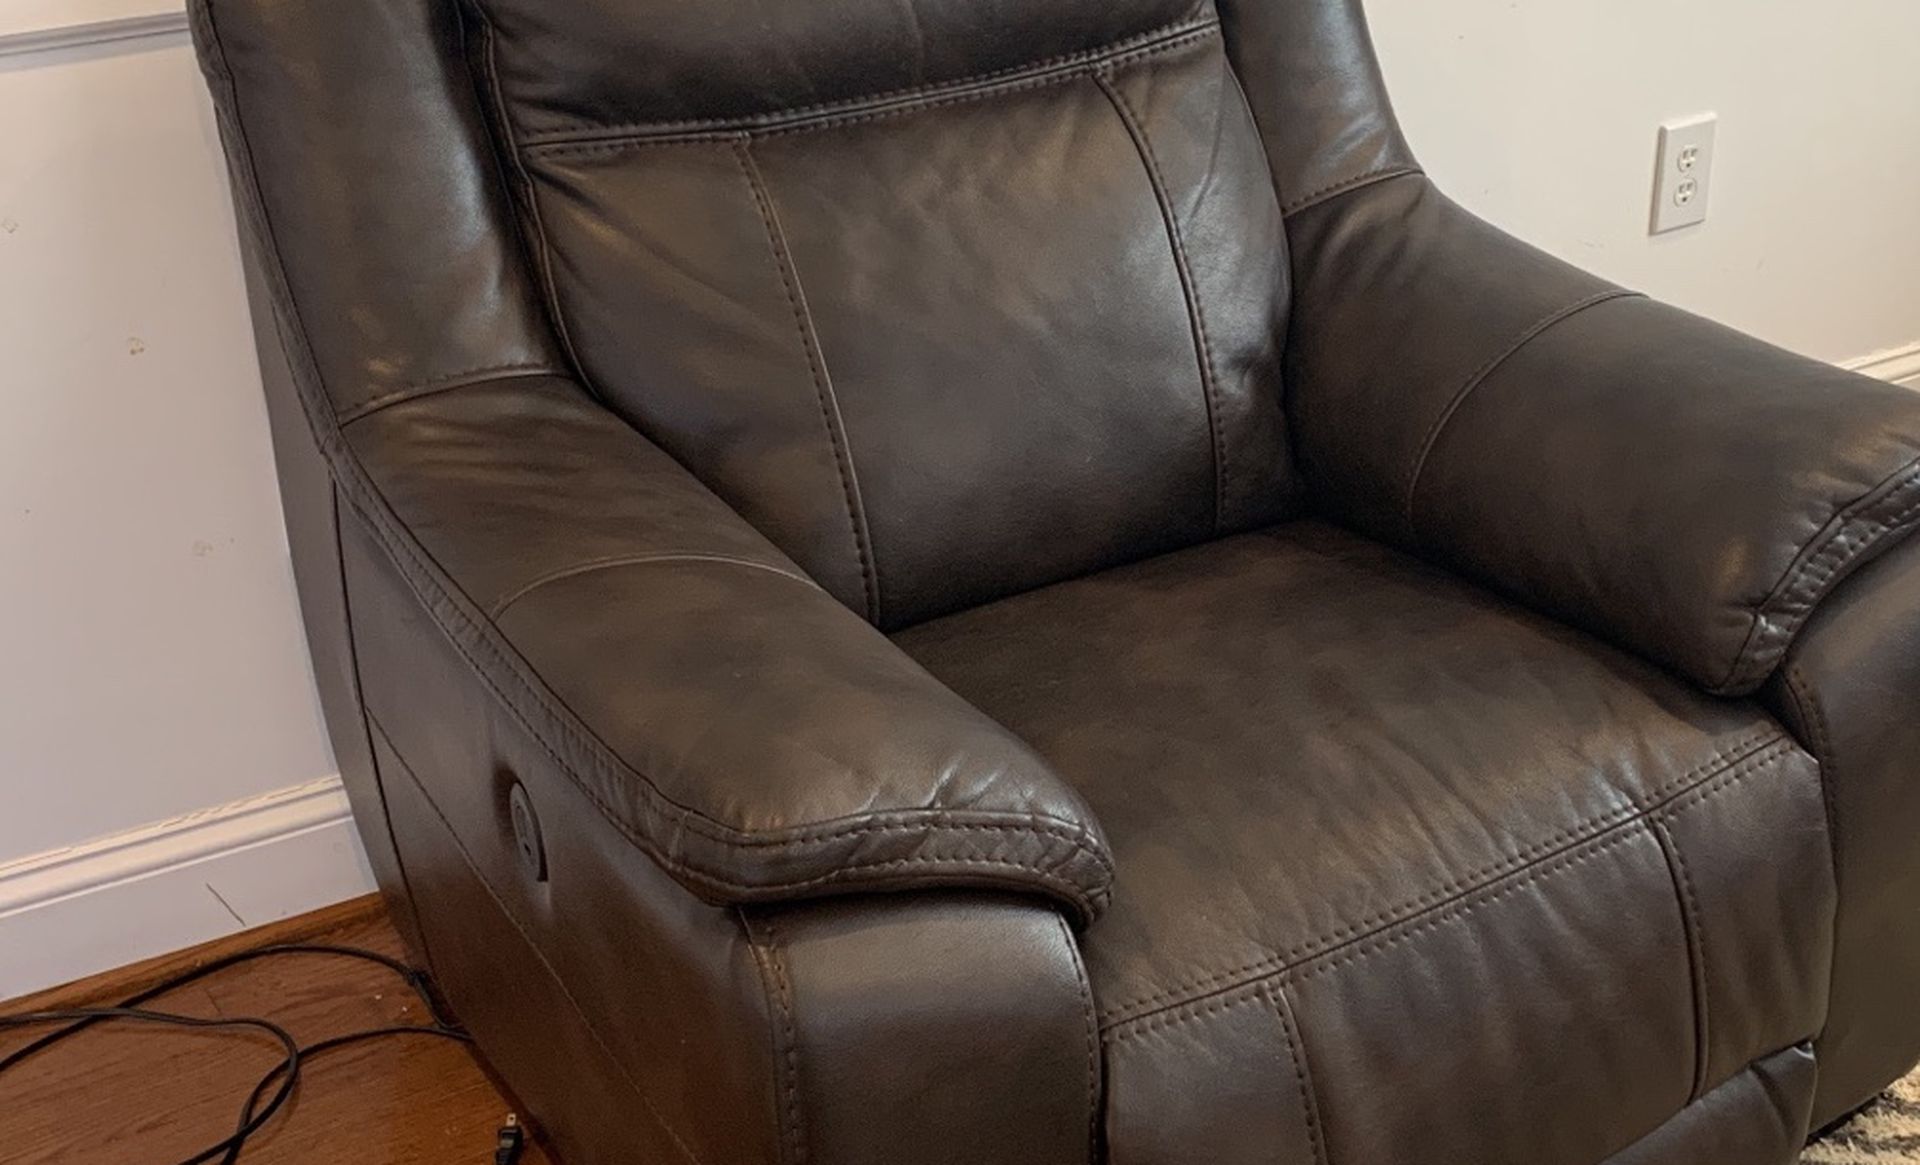 Leather Recliner (works great, automatic)